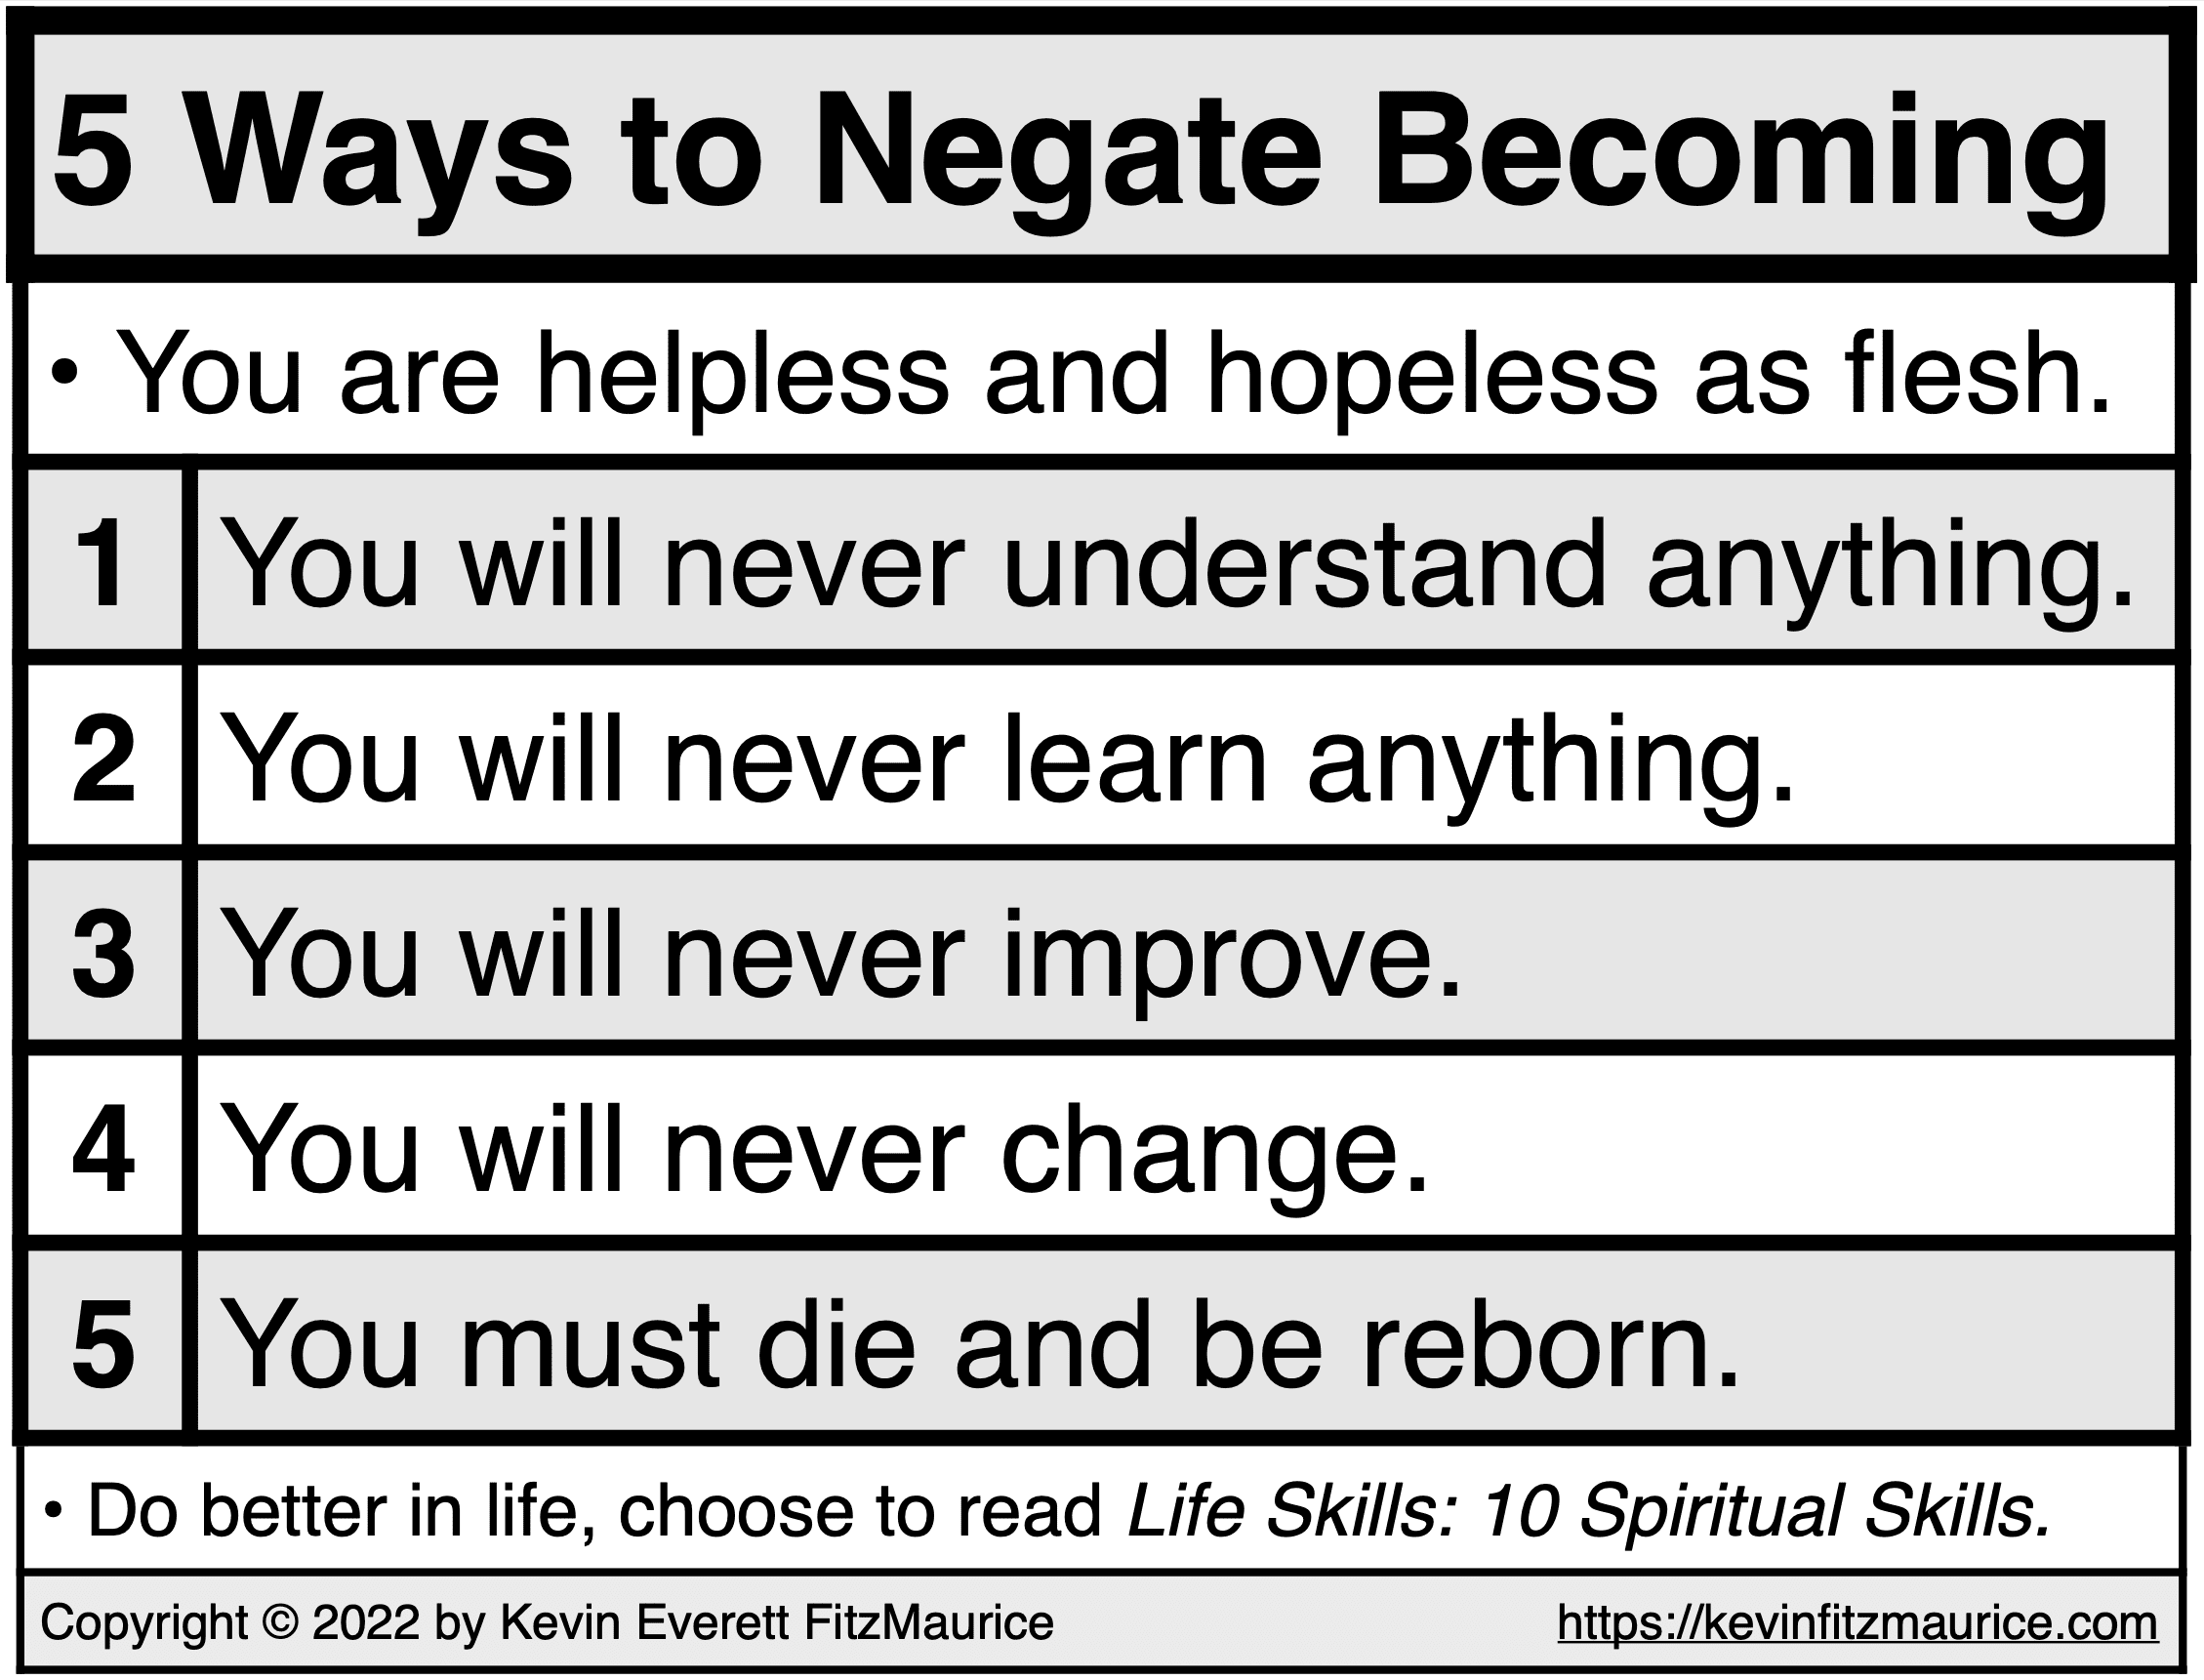 5 Ways to Negate Becoming